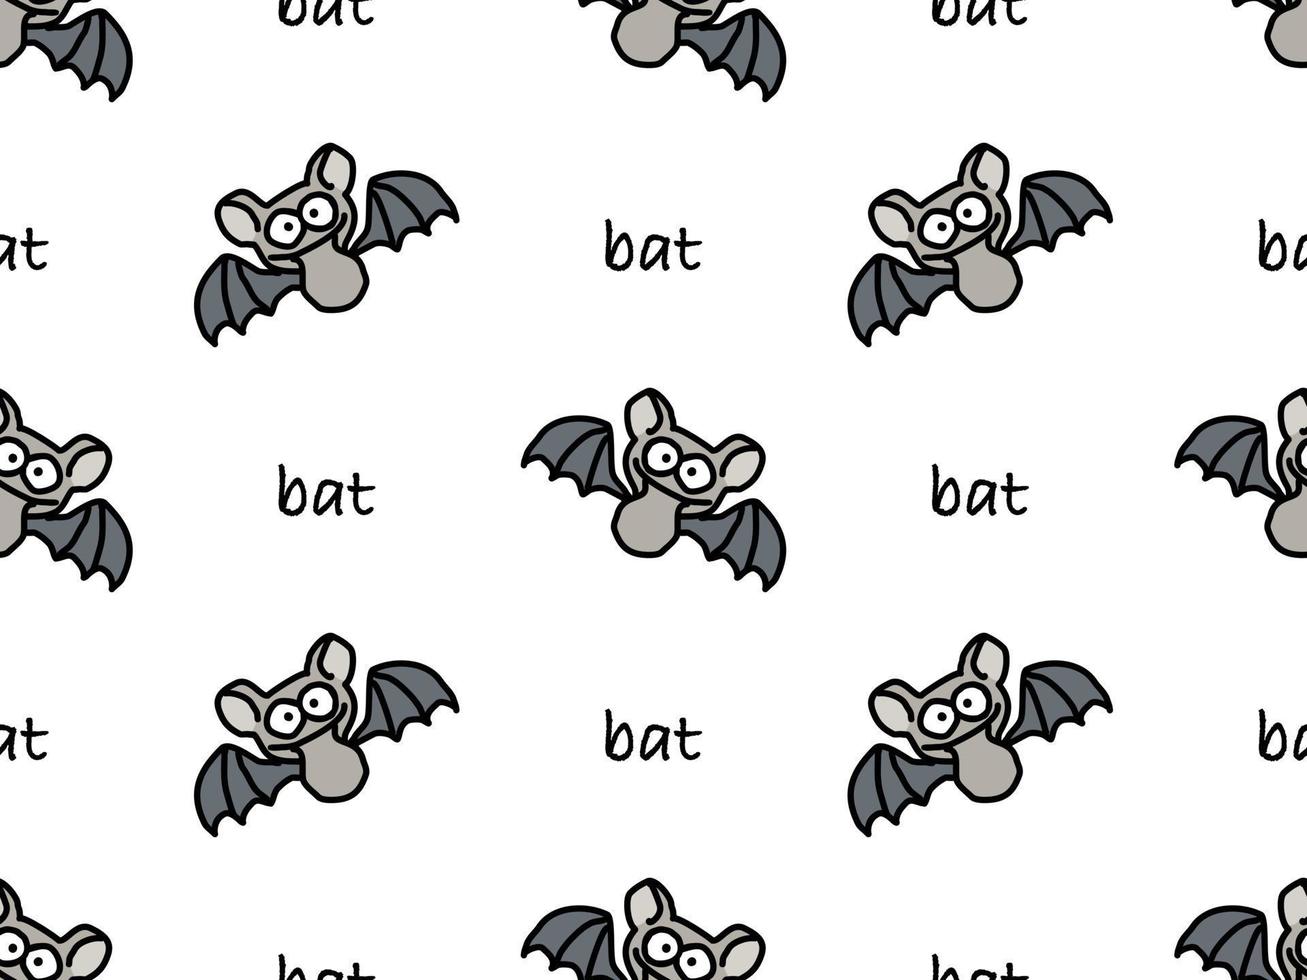 Bat cartoon character seamless pattern on white background vector